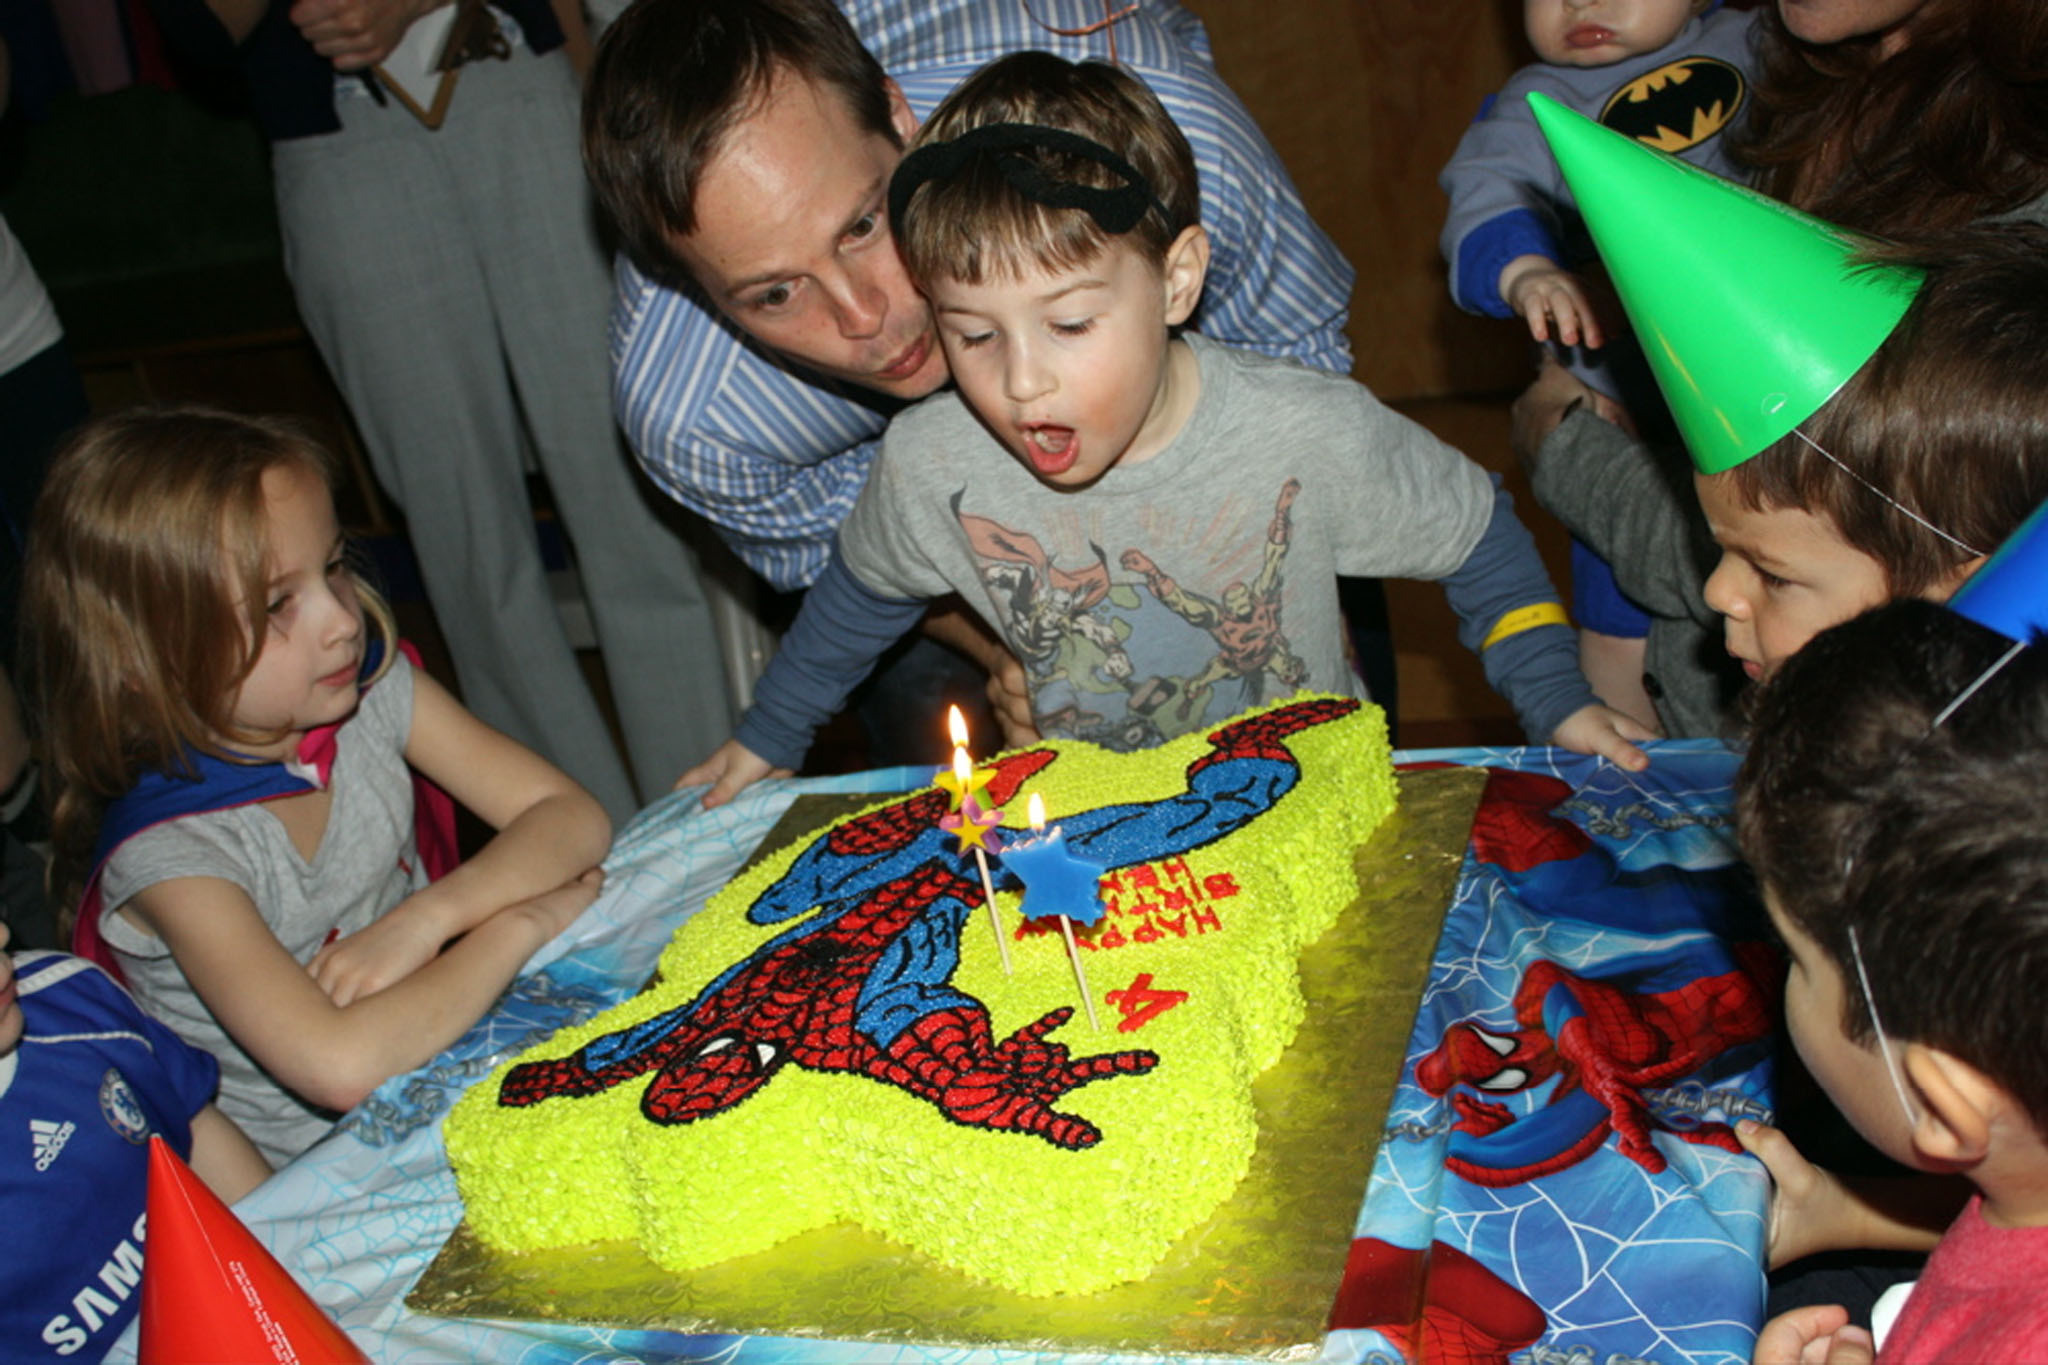 Kids Birthday Party New York
 Best Birthday Parties for Kids in NYC That Make an Epic Bash